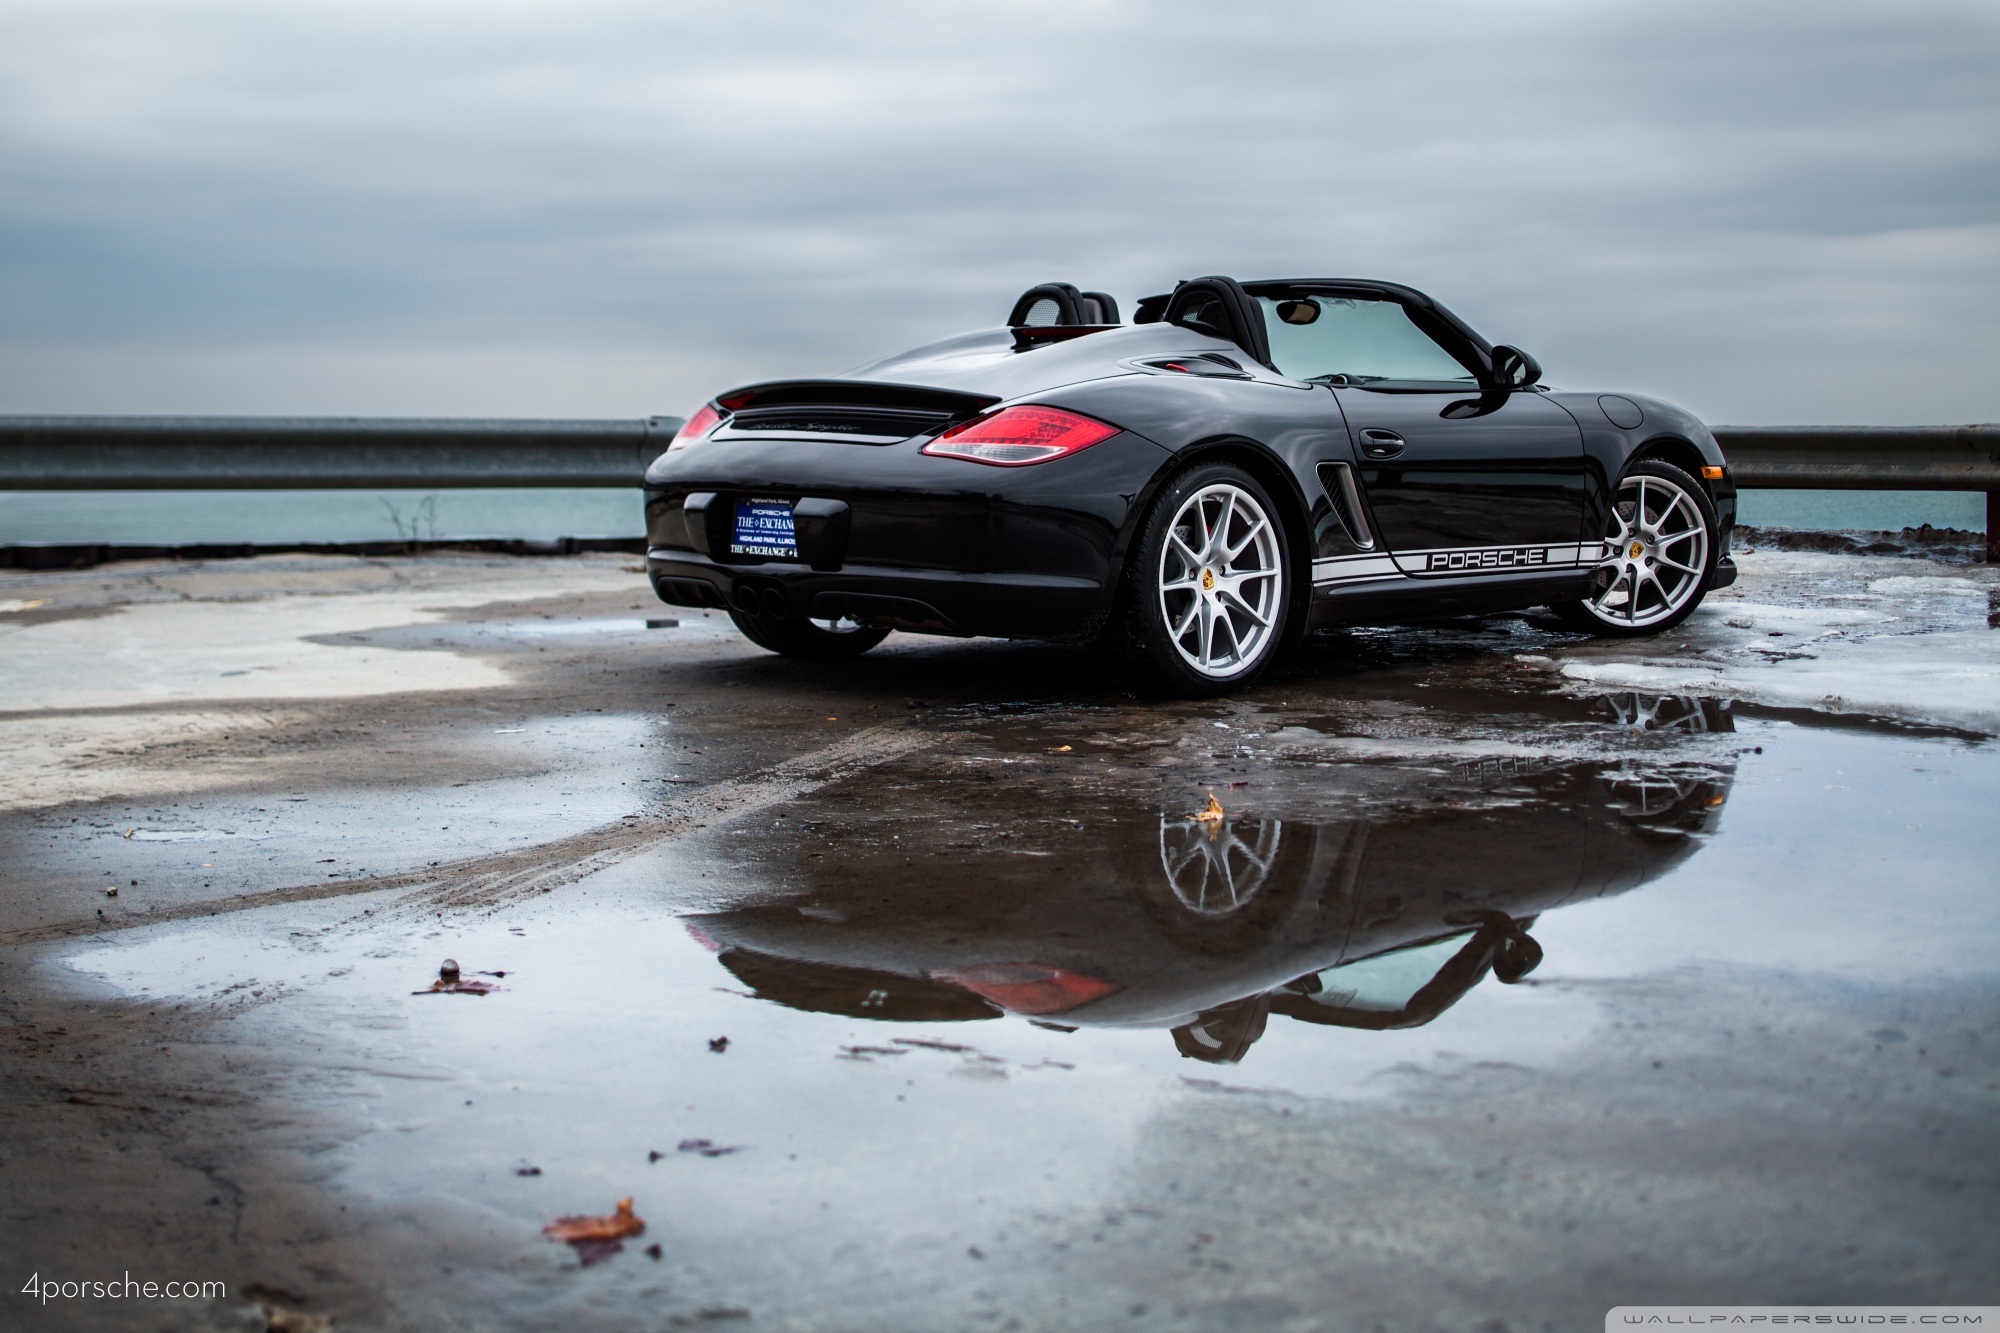 2012 Black Porsche Boxster Spyder By Lake Michigan Brought To You By The Porsche Exchange In Highland Park Il Ultra Hd Desktop Background Wallpaper For 4k Uhd Tv Widescreen Ultrawide